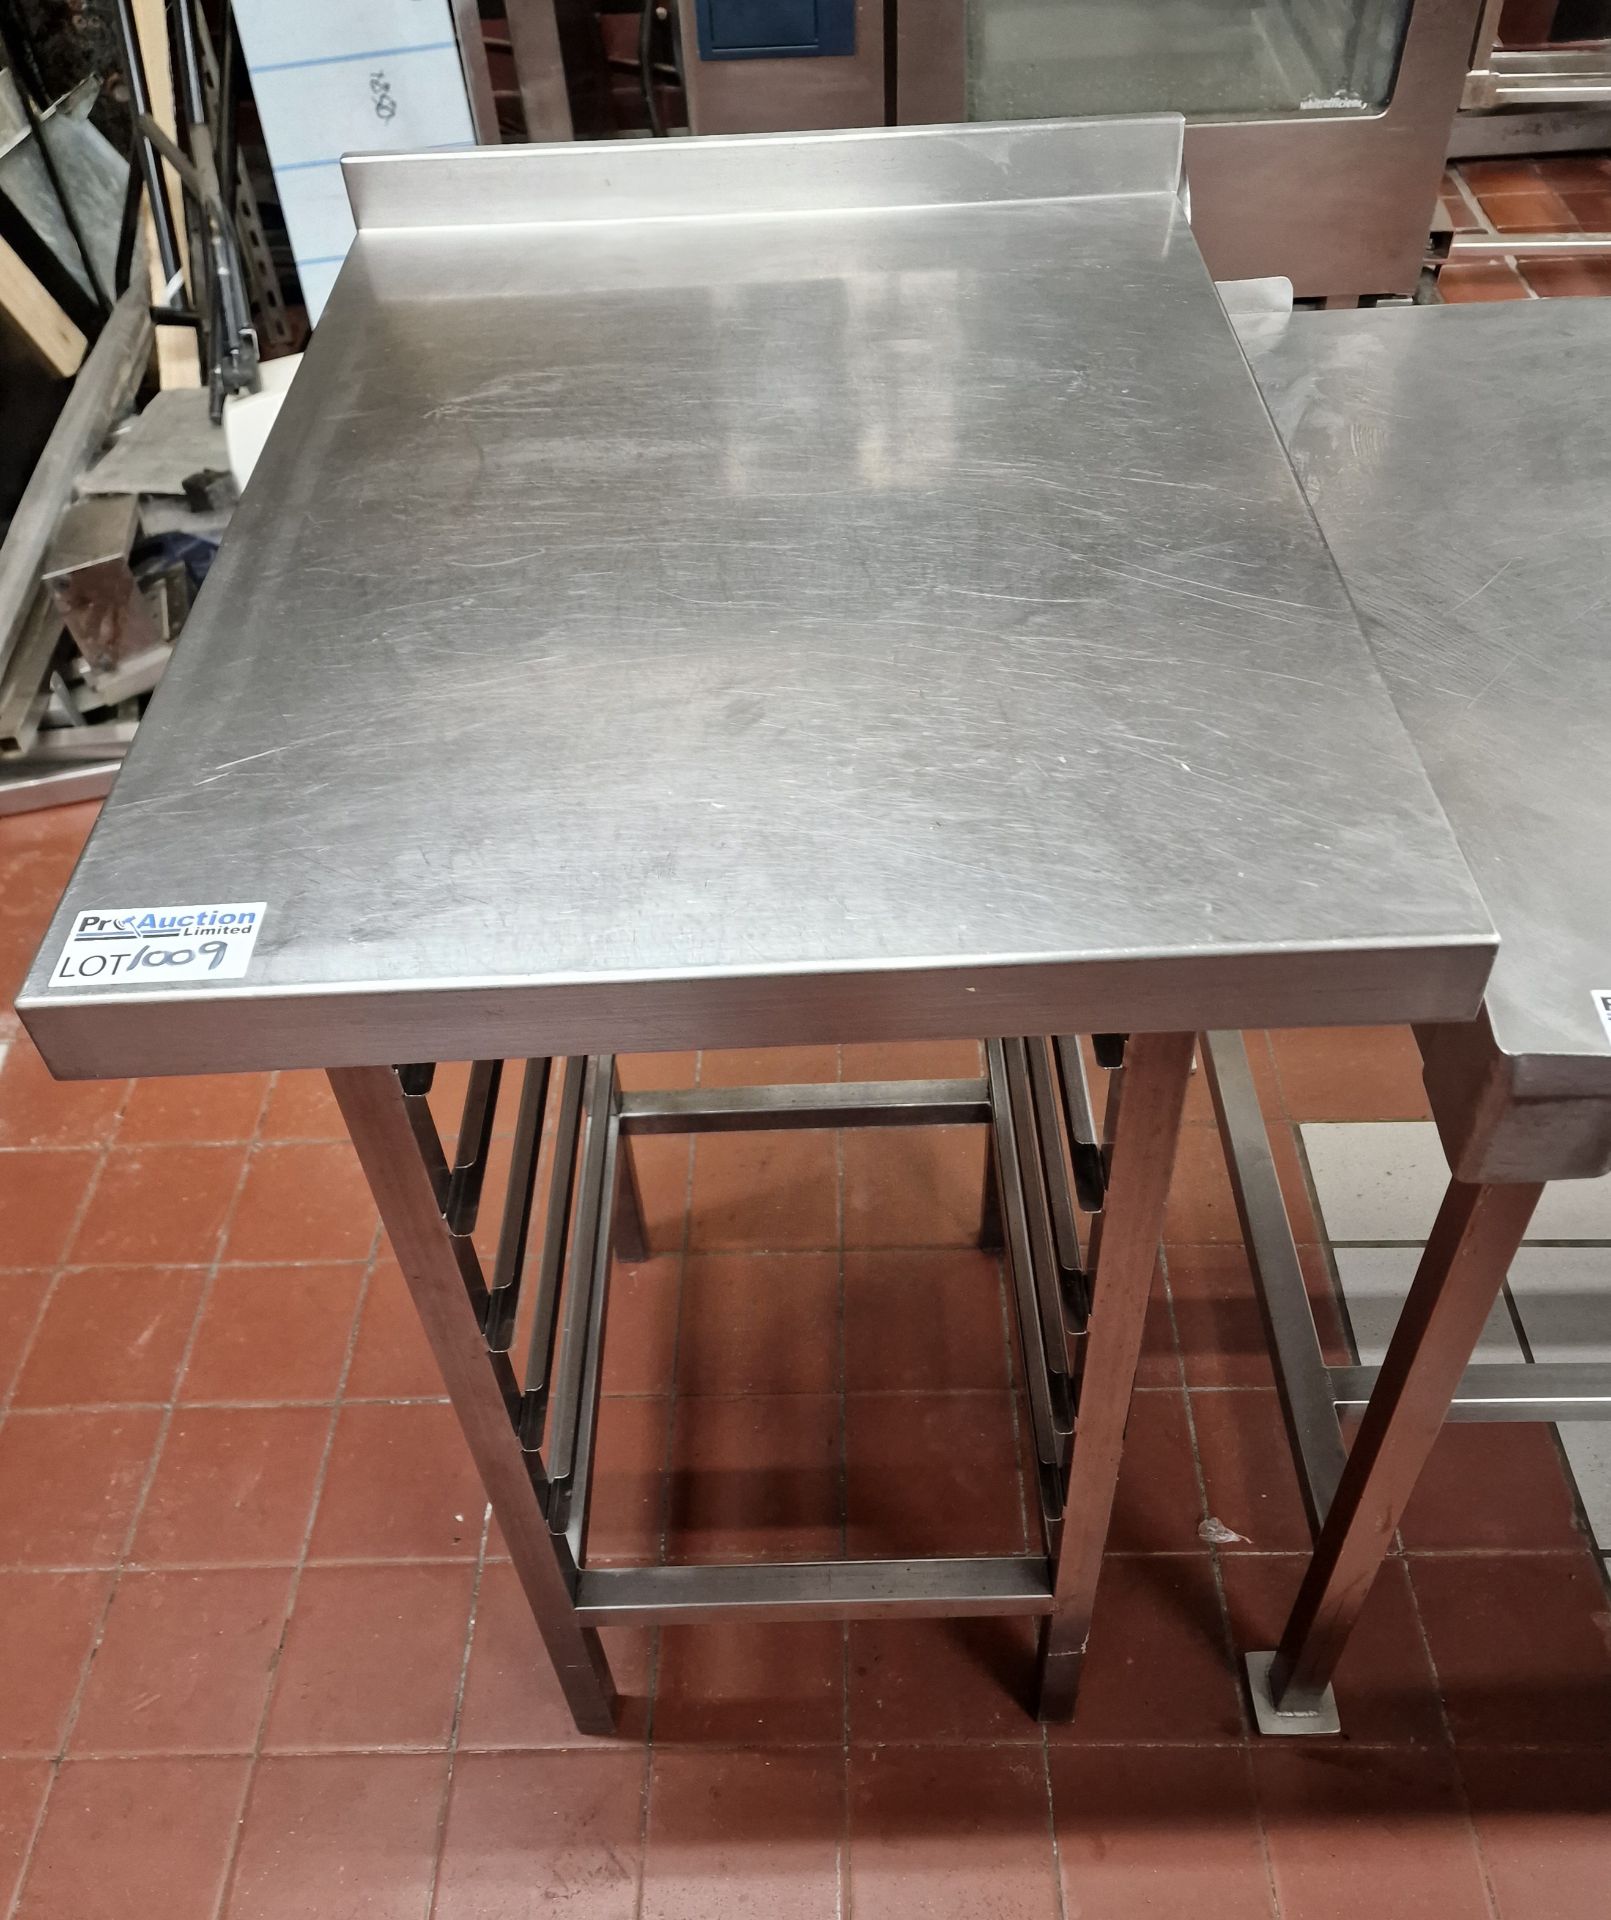 Stainless Steel Preparation Table With Back Stand And Five Tray Rack Under 60 x 80 x 89cm